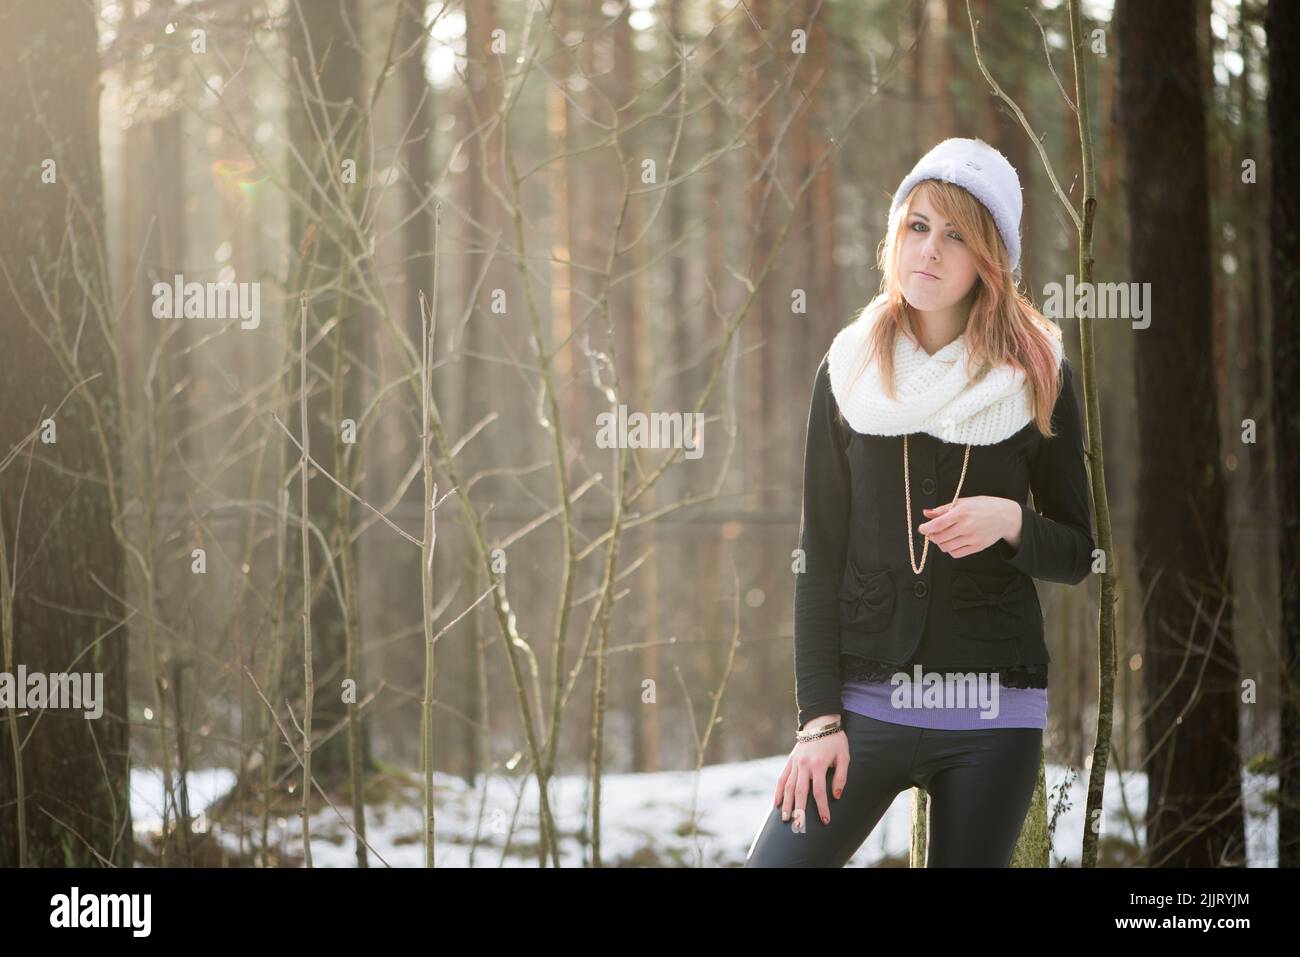 A Caucasian blonde girl in a winter jacket and hat posing with a blurred background of leafless trees Stock Photo